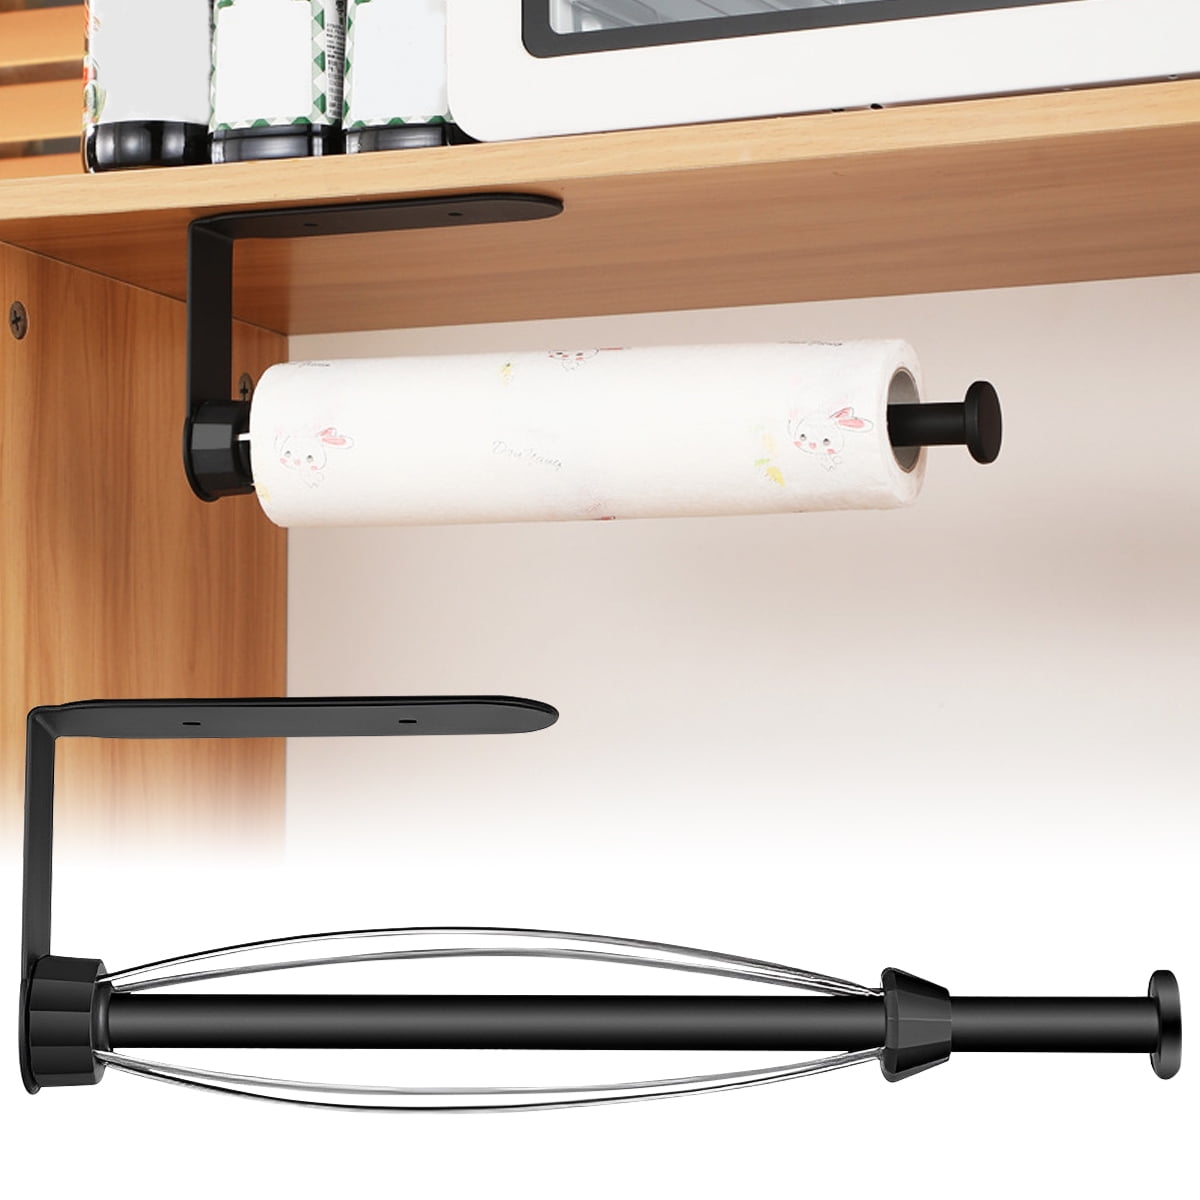 WeGuard Paper Towel Holder Wall Mount with Self-Adhesive and Screws,  Dual-Use Paper Towel Holder Under Cabinet with Special Ratchet System,  One-handed operation Paper Roll Holder with Damping Function 